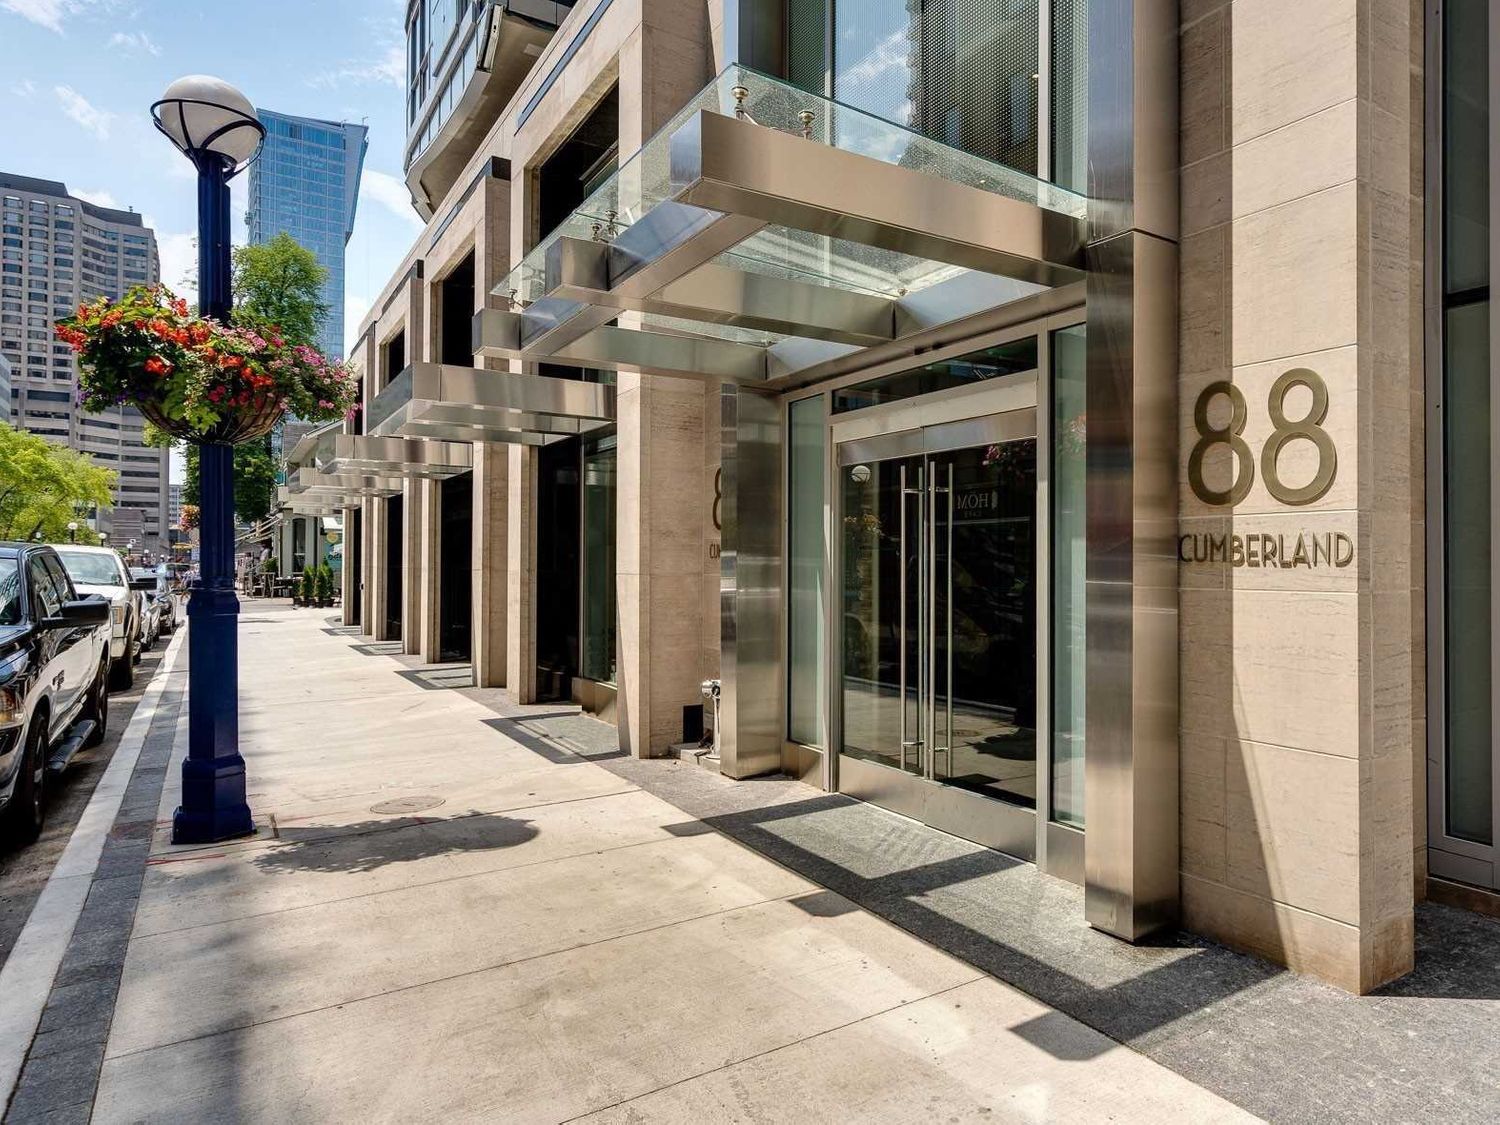 88 Cumberland Street. Minto Yorkville Park is located in  Downtown, Toronto - image #2 of 3